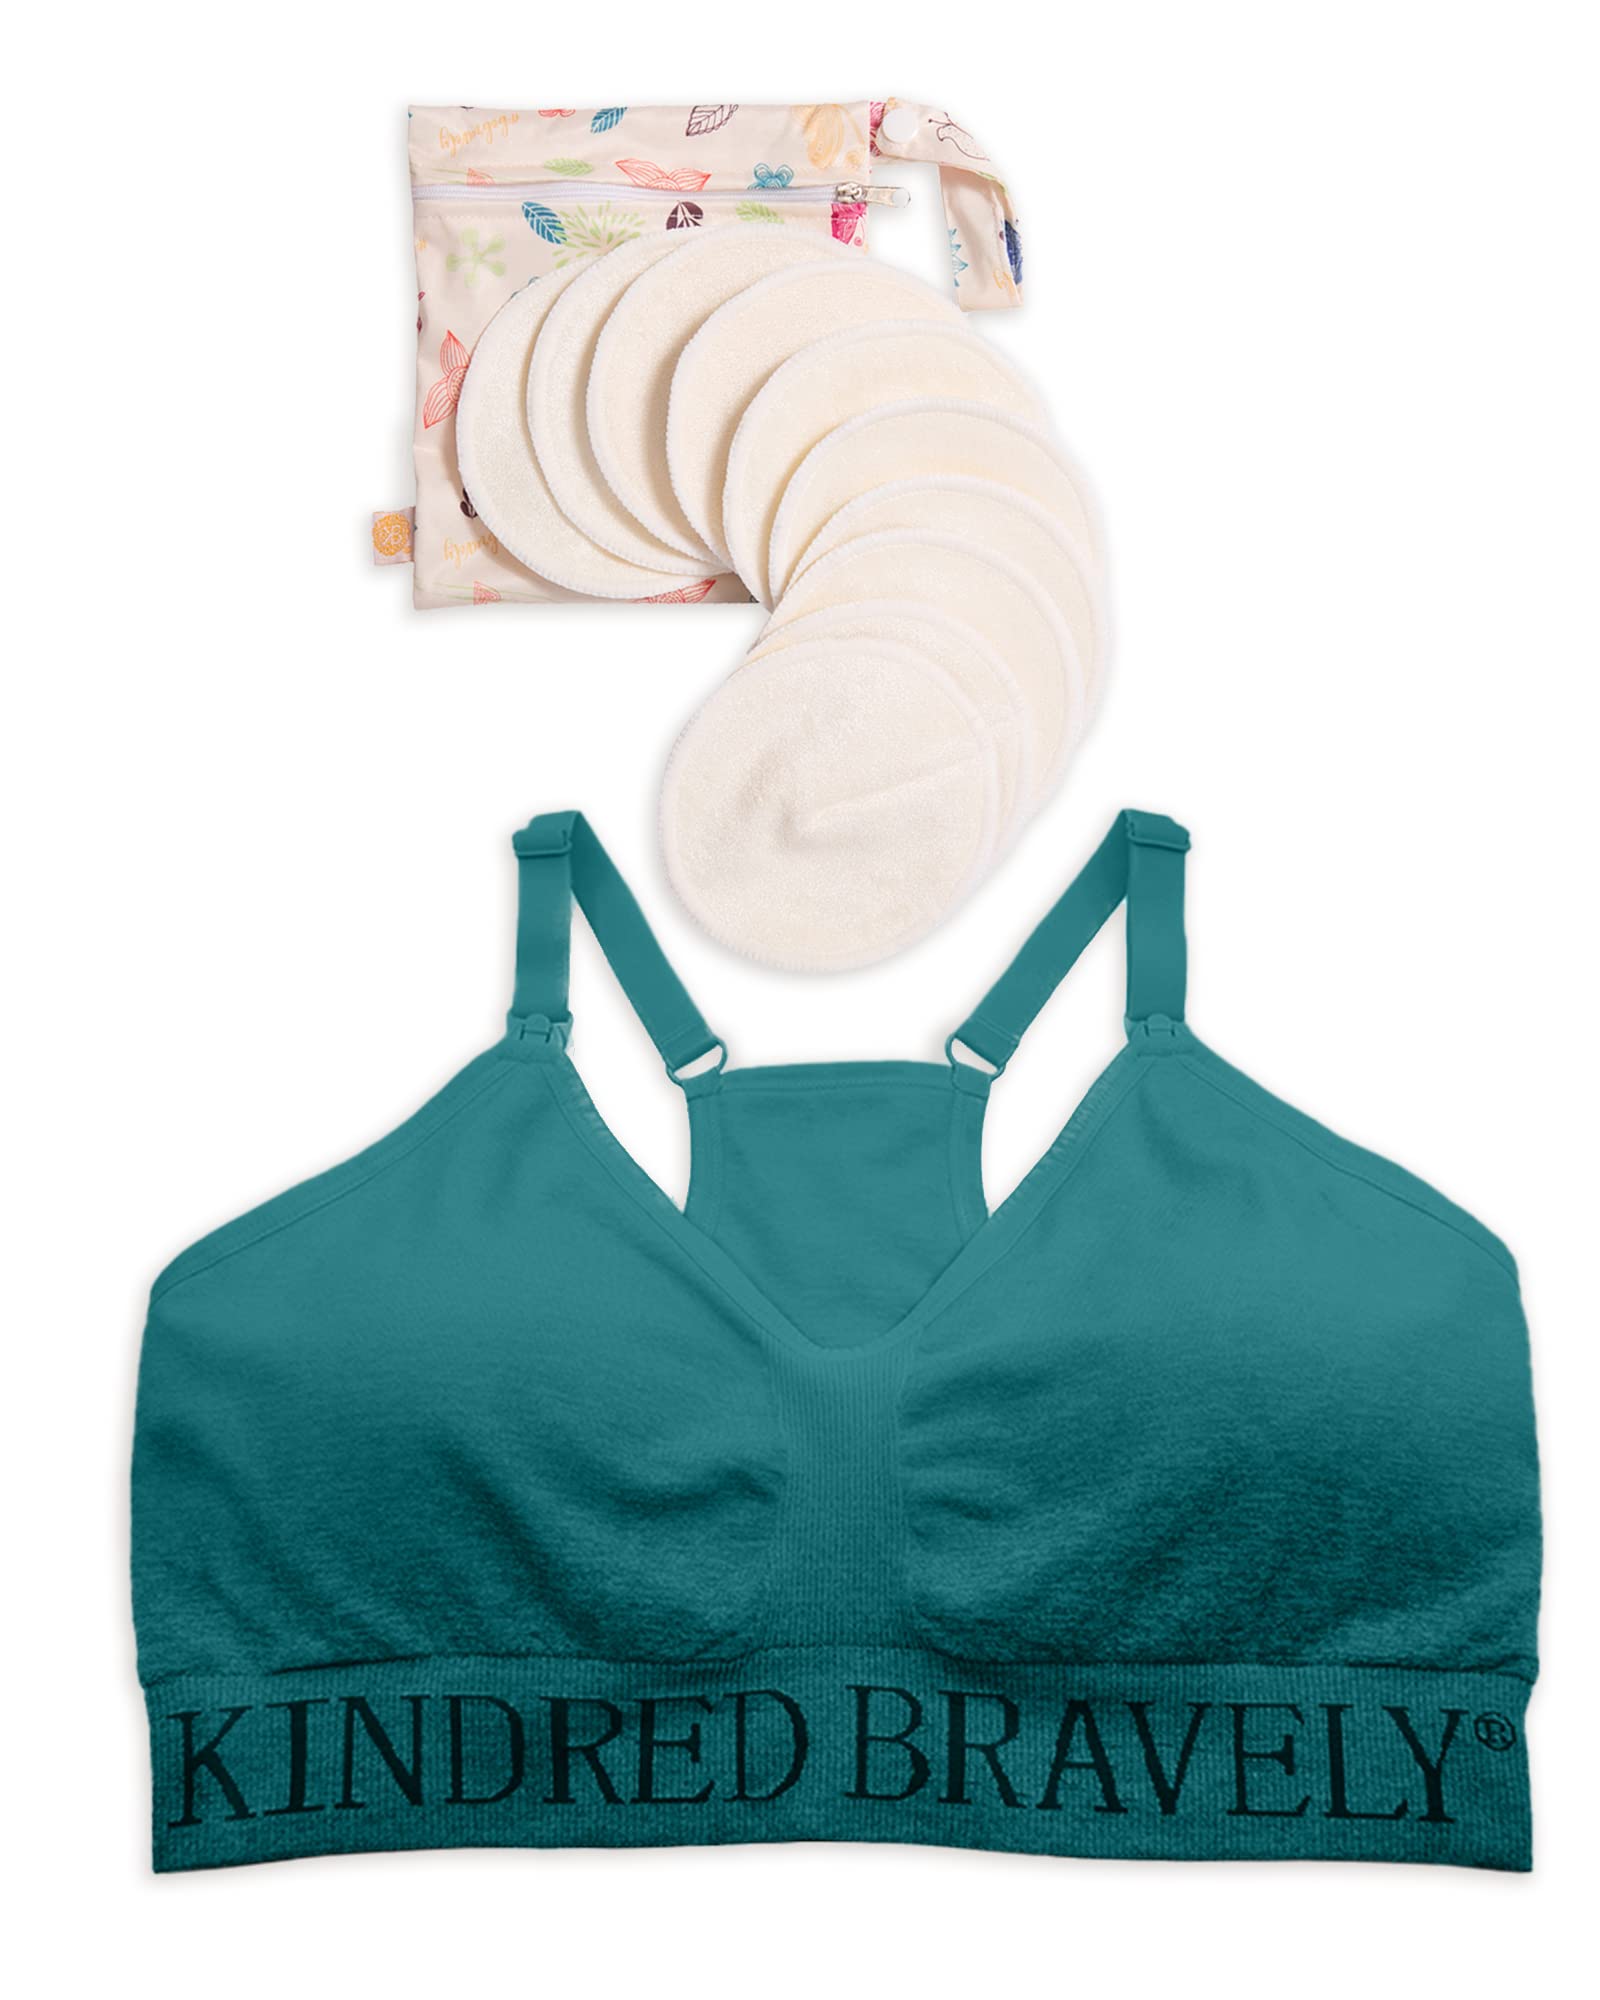 Kindred Bravely Hands Free Pumping Sports Bra (Teal, X-Large) & Organic Washable Breast Pads Bundle